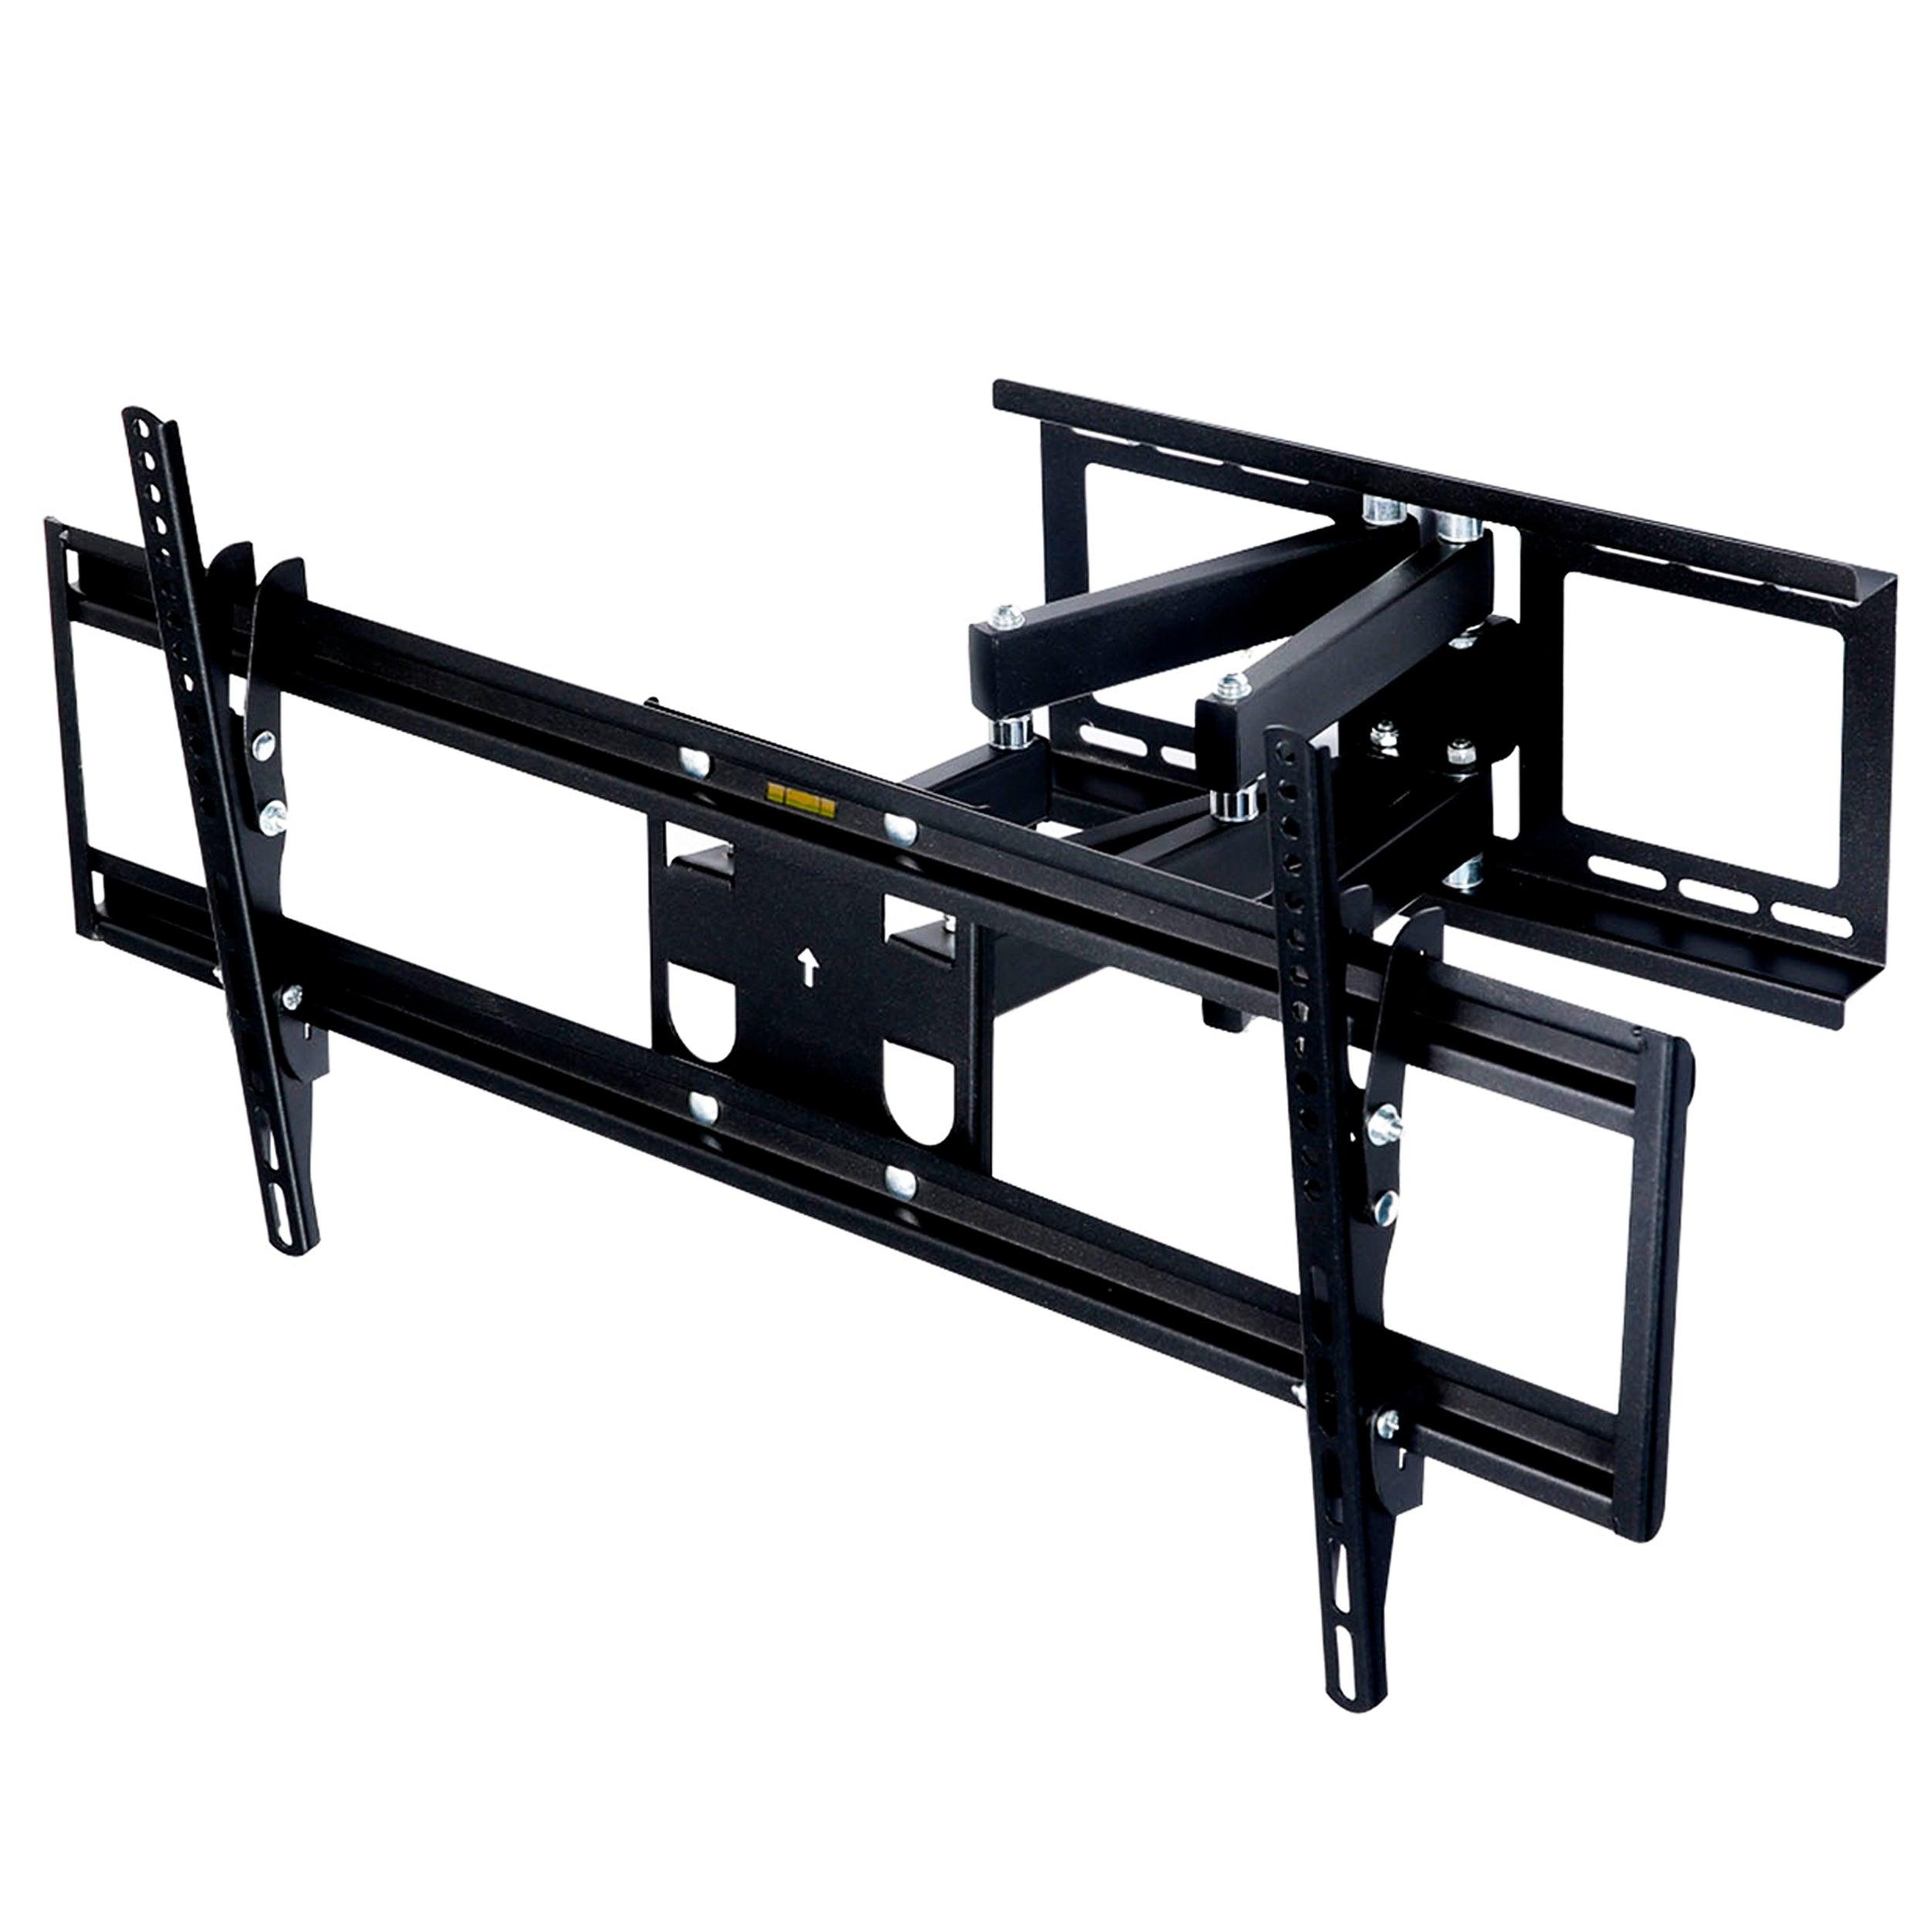 MegaMounts Full Motion Articulated Tilt and Swivel Television Wall Mount for 37-60 Inch Screens with Bubble Level FSSA Global B